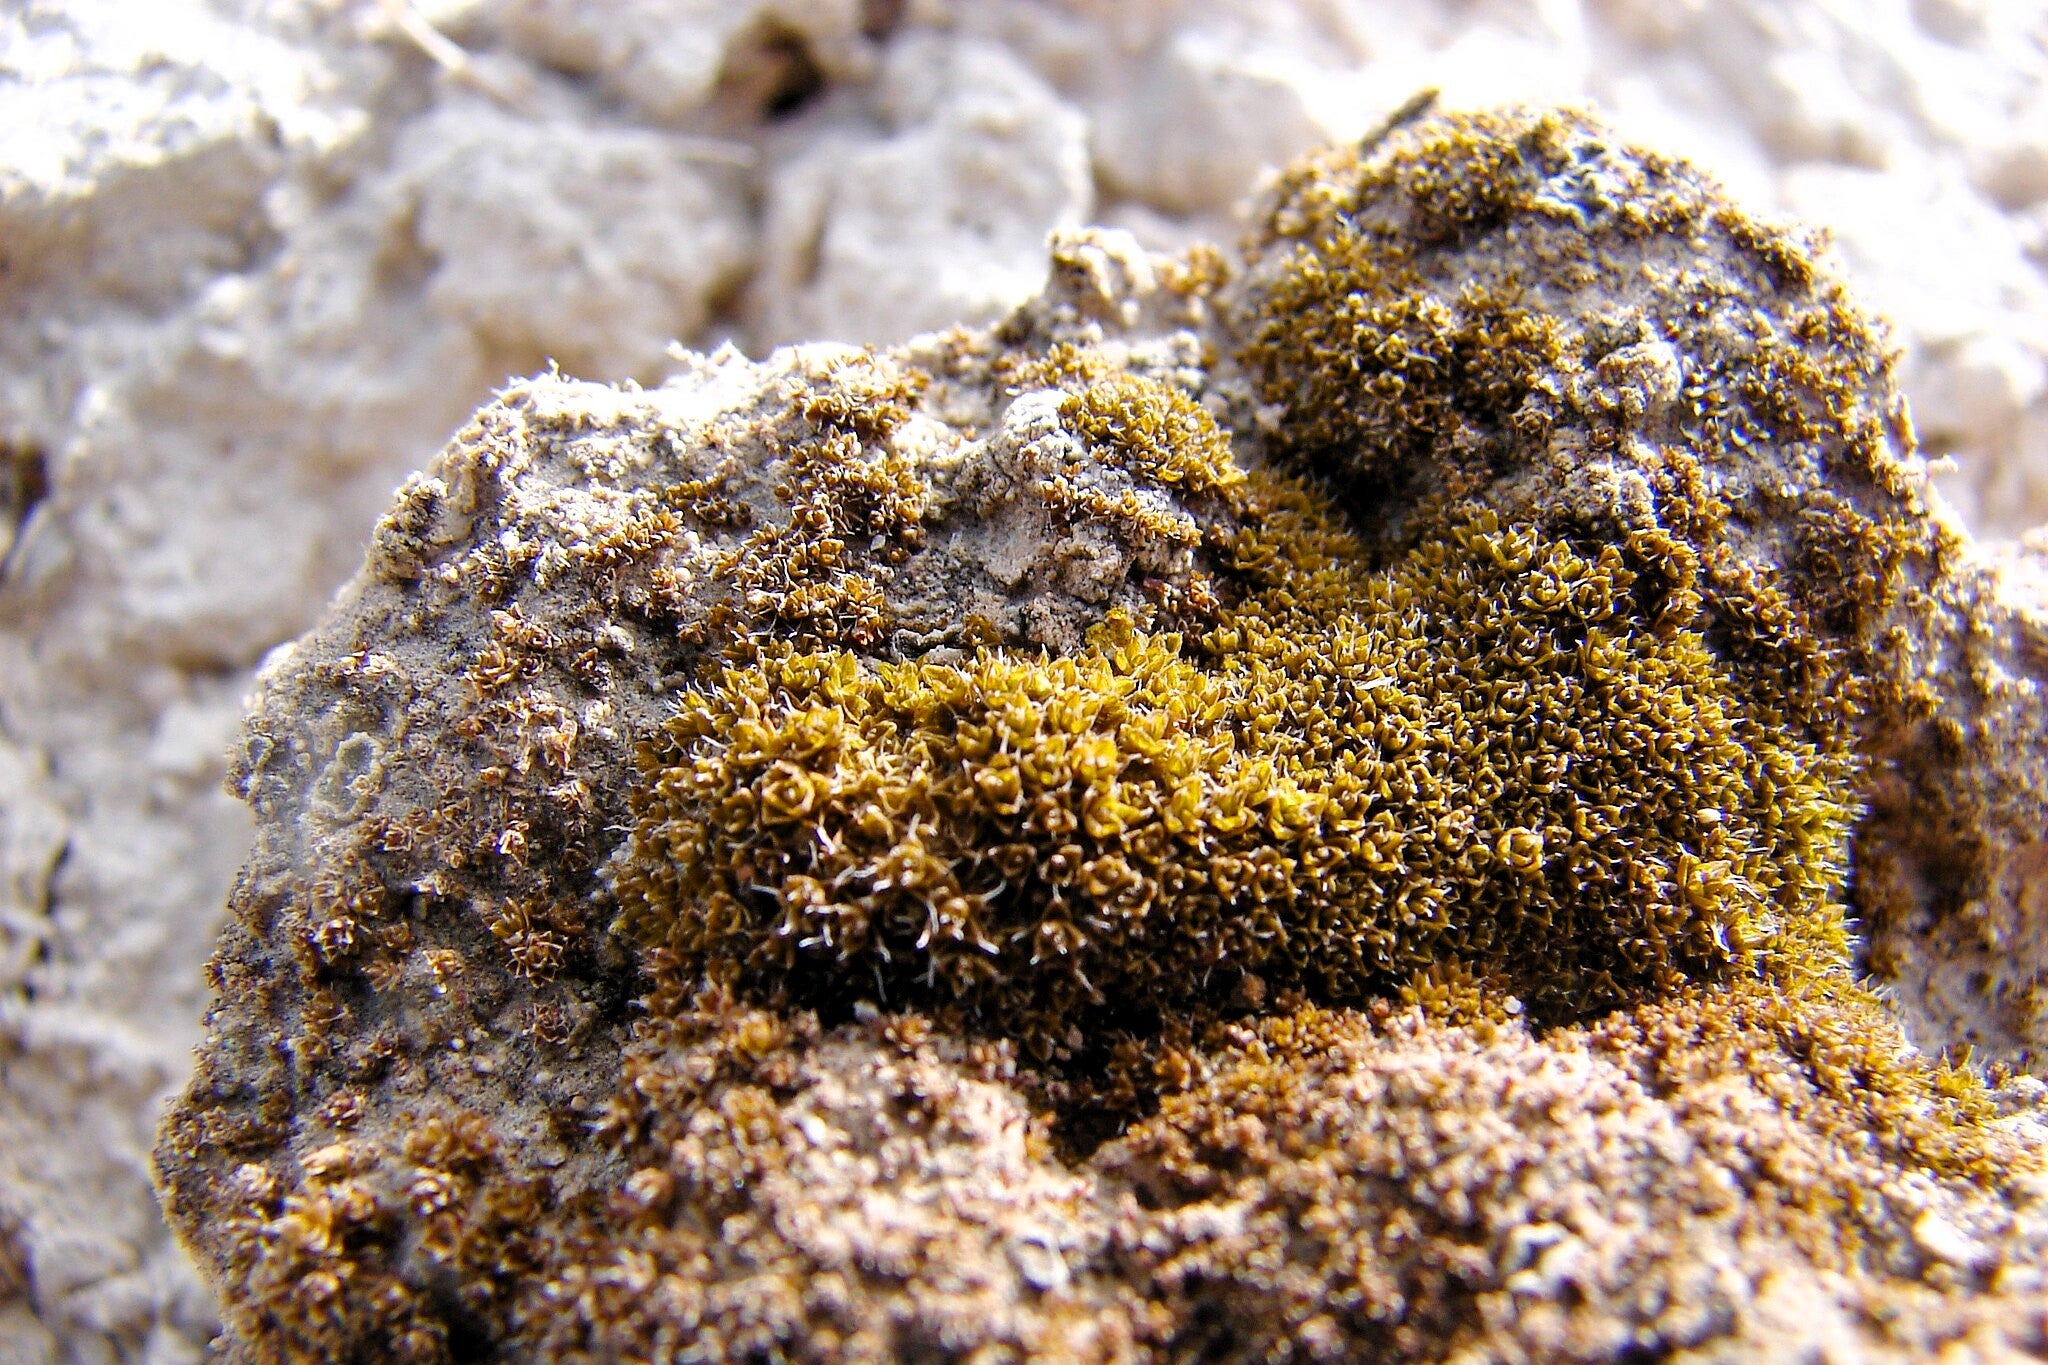 Syntrichia caninervis can survive the extreme conditions of Mars, scientists have discovered